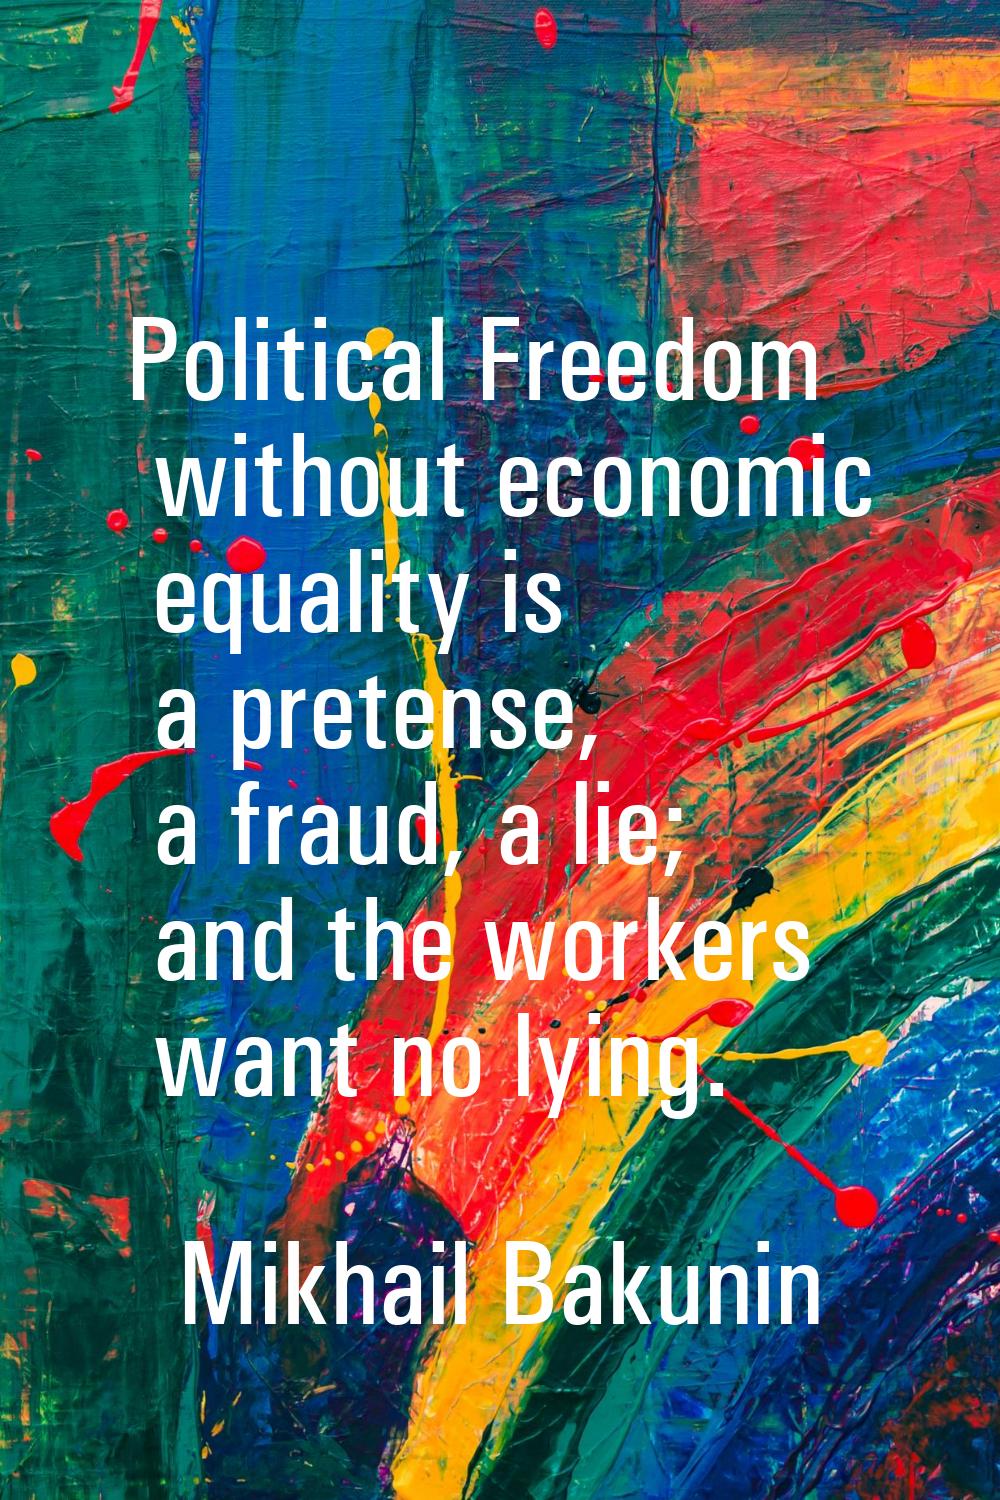 Political Freedom without economic equality is a pretense, a fraud, a lie; and the workers want no 